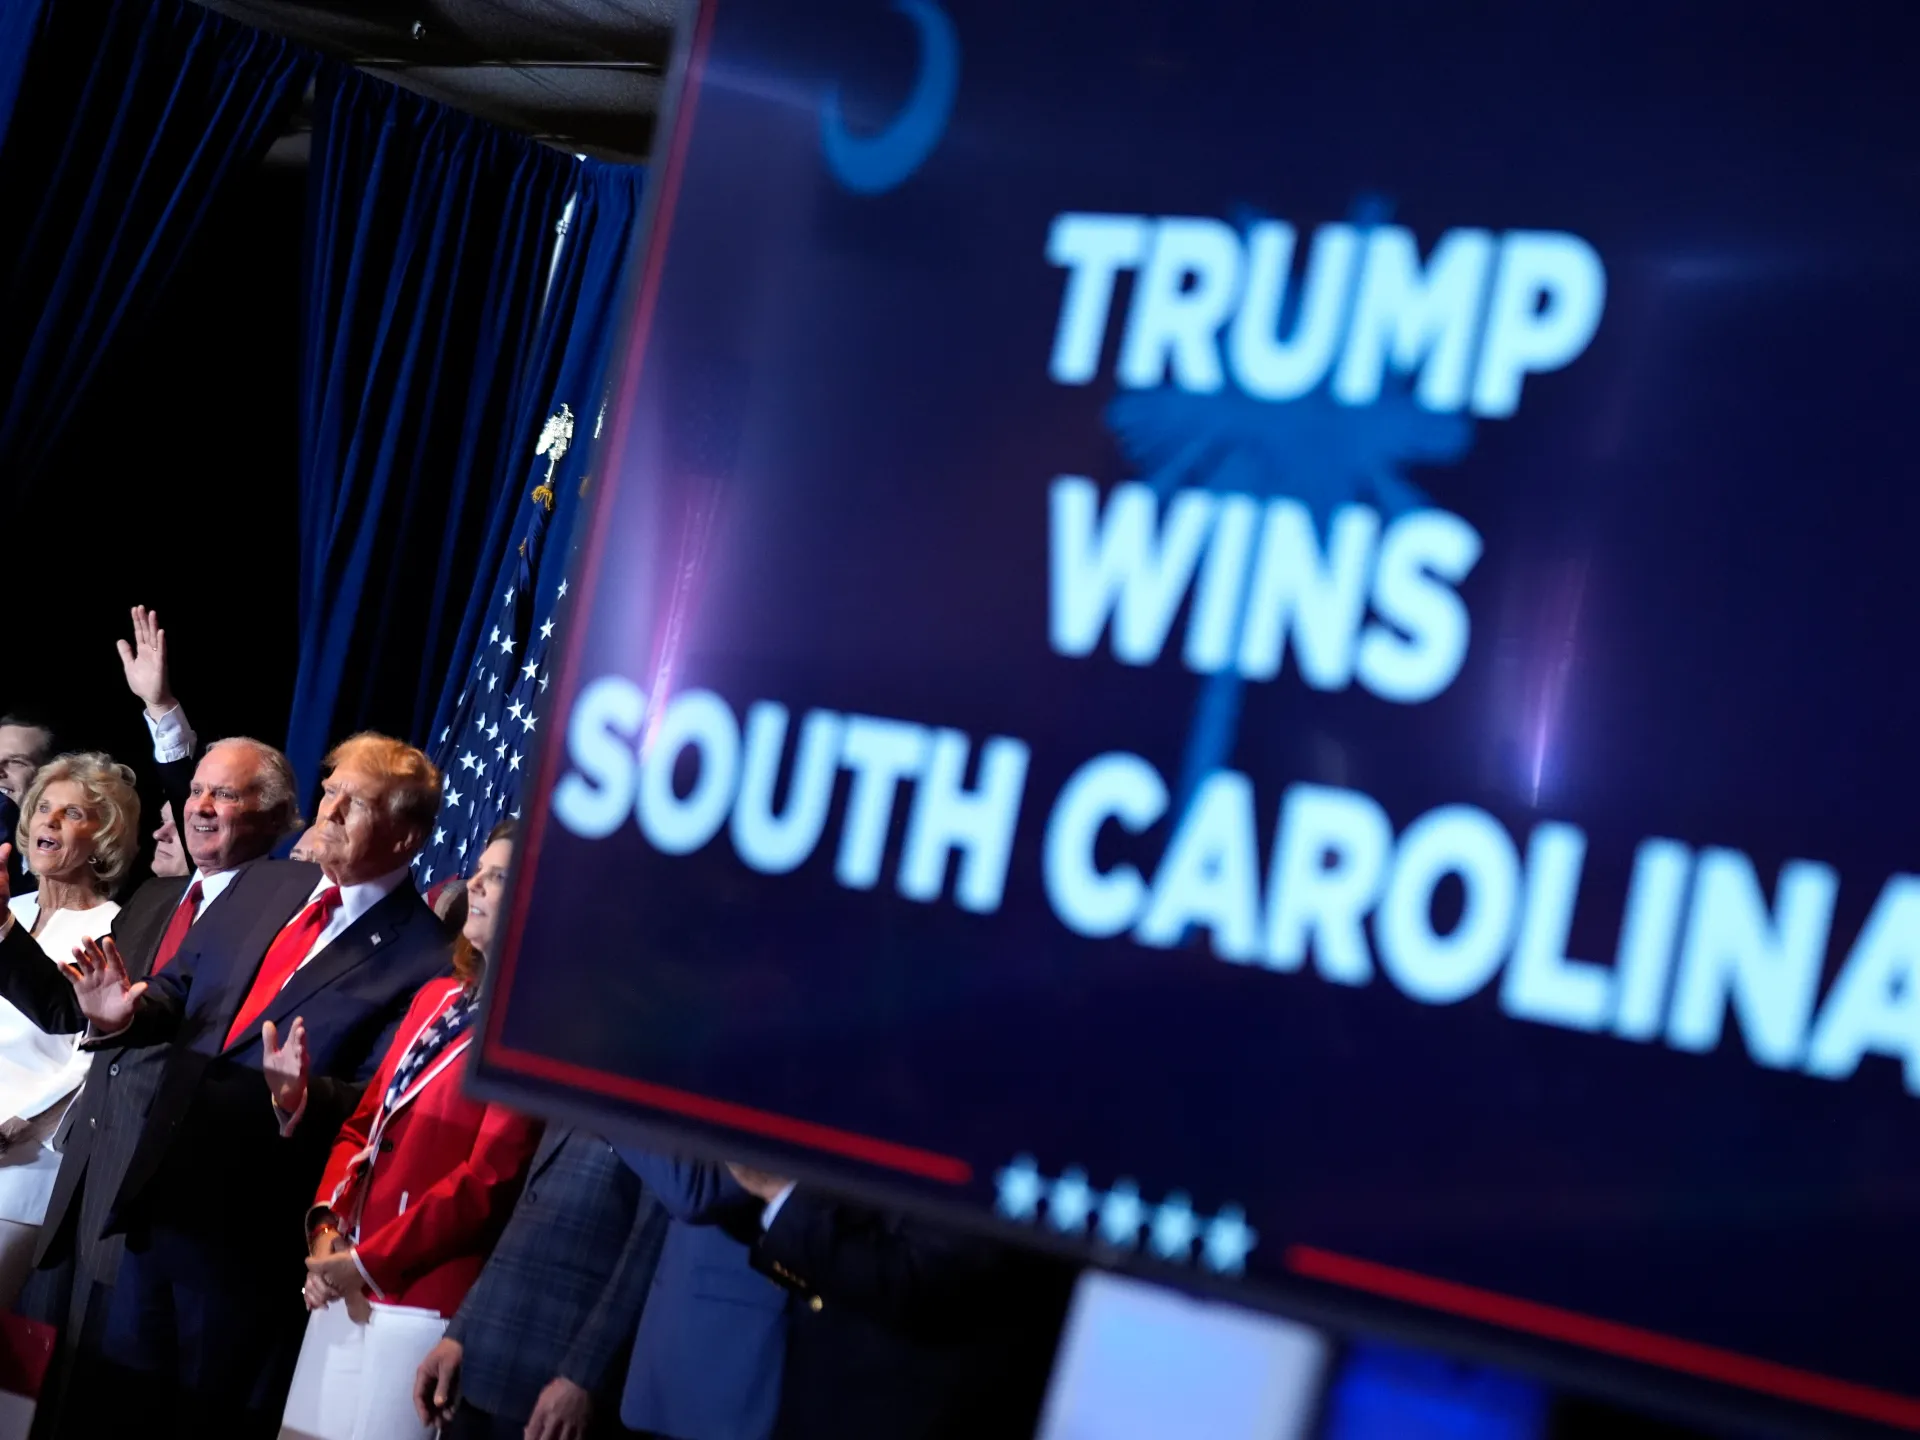 South Carolina Exit Polling : Understanding Haley Home-State Loss